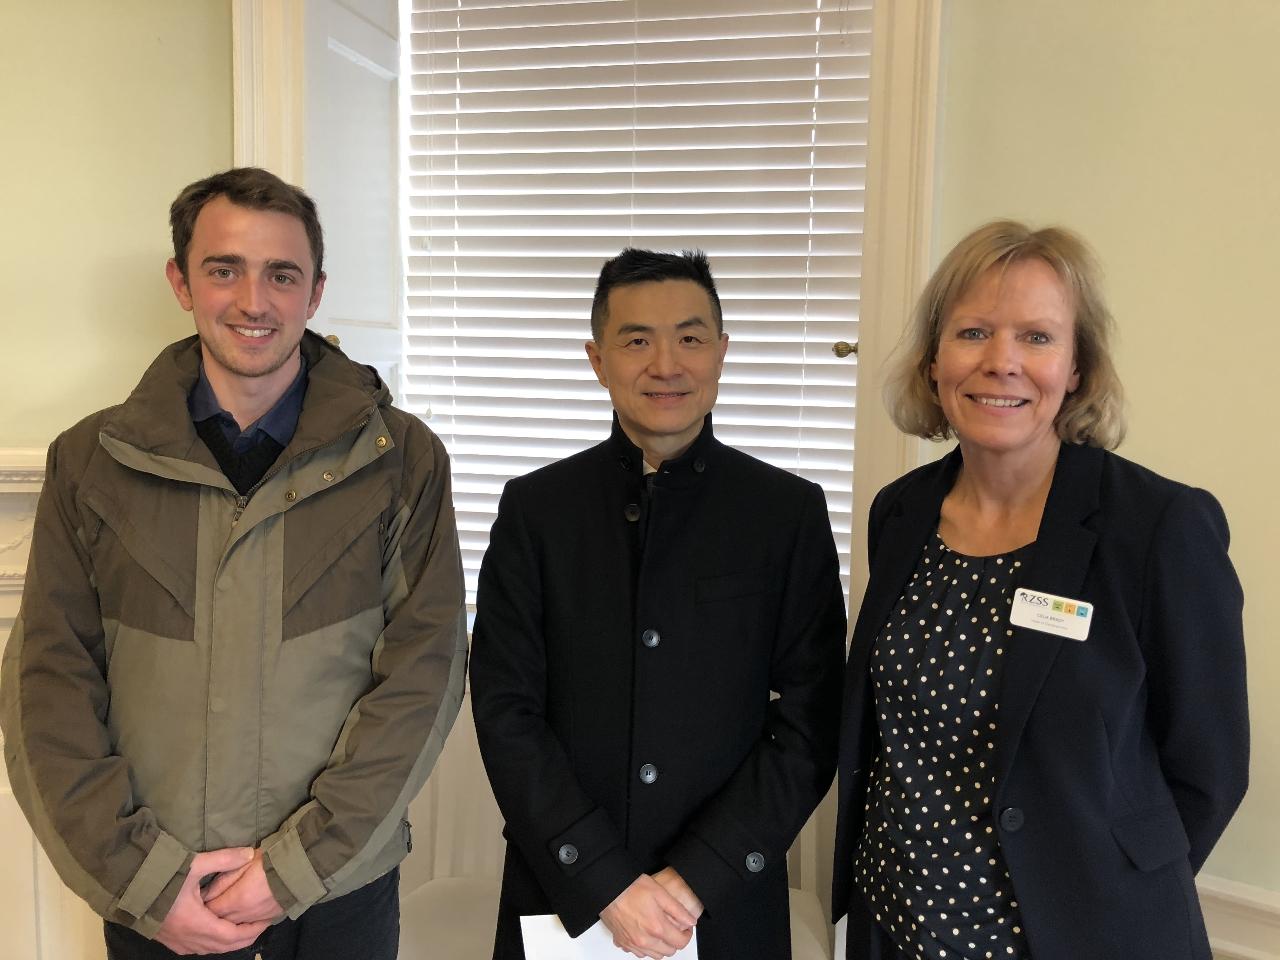 On behalf of the Taiwanese government, Director General Jason C.C. Lien meets Celia Brady, Head of Fundraising and Ben Harrower, Conservation Programme Manager to discuss about the Giant Armadillo Conservation Program under the Royal Zoological Society of Scotland (30th October 2018 at the RZSS).